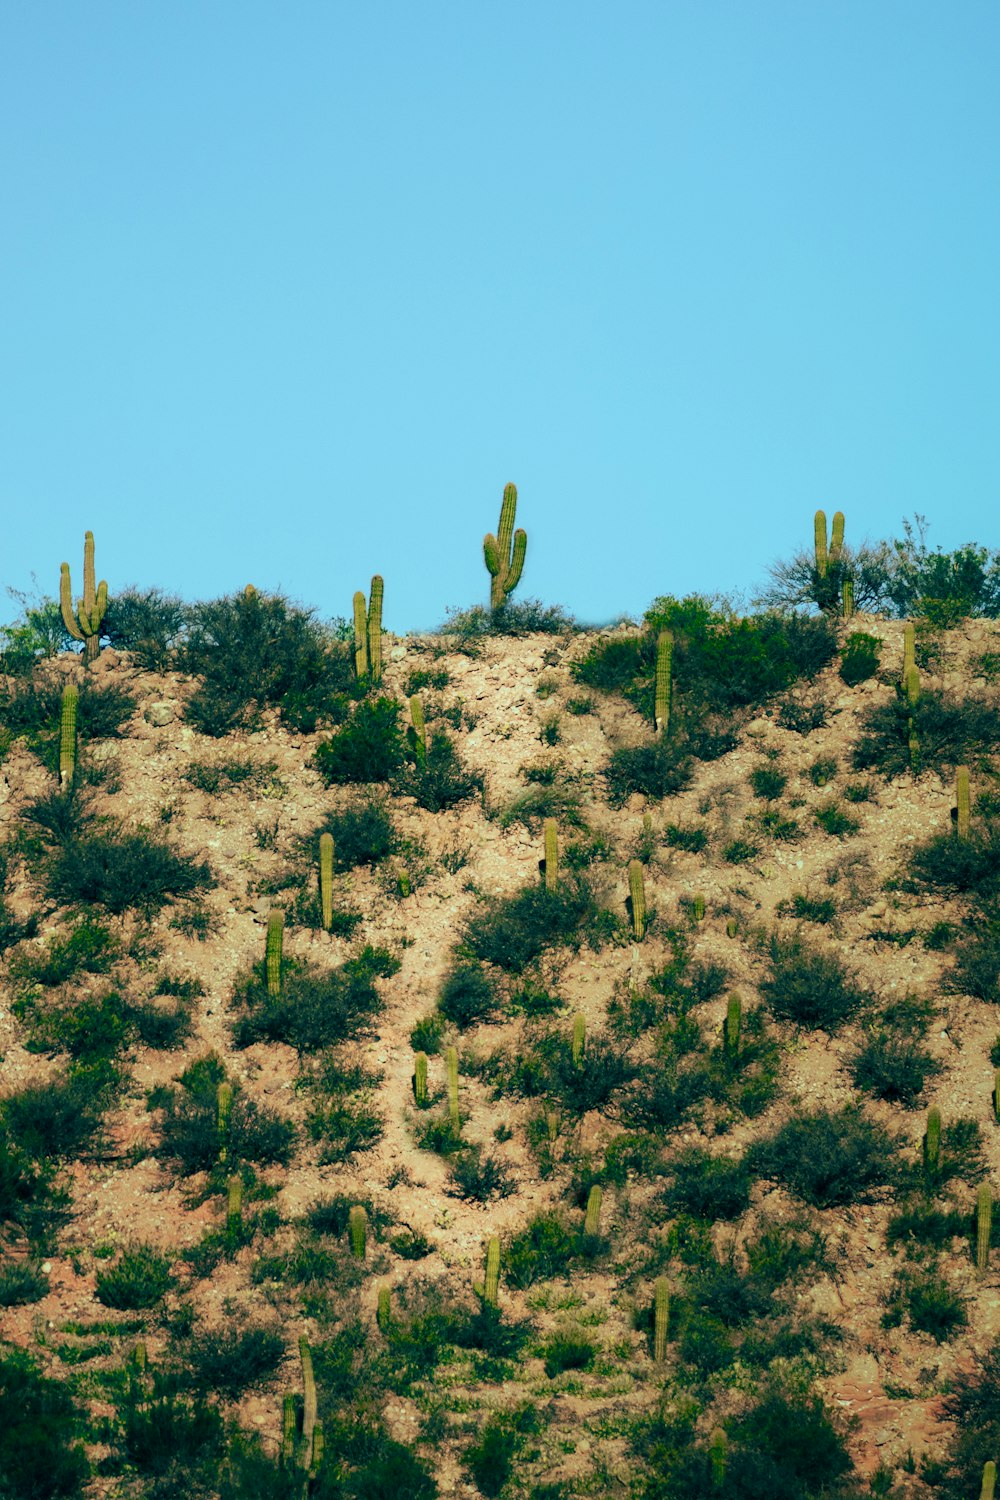 a hill covered in cactus plants with a blue sky in the background